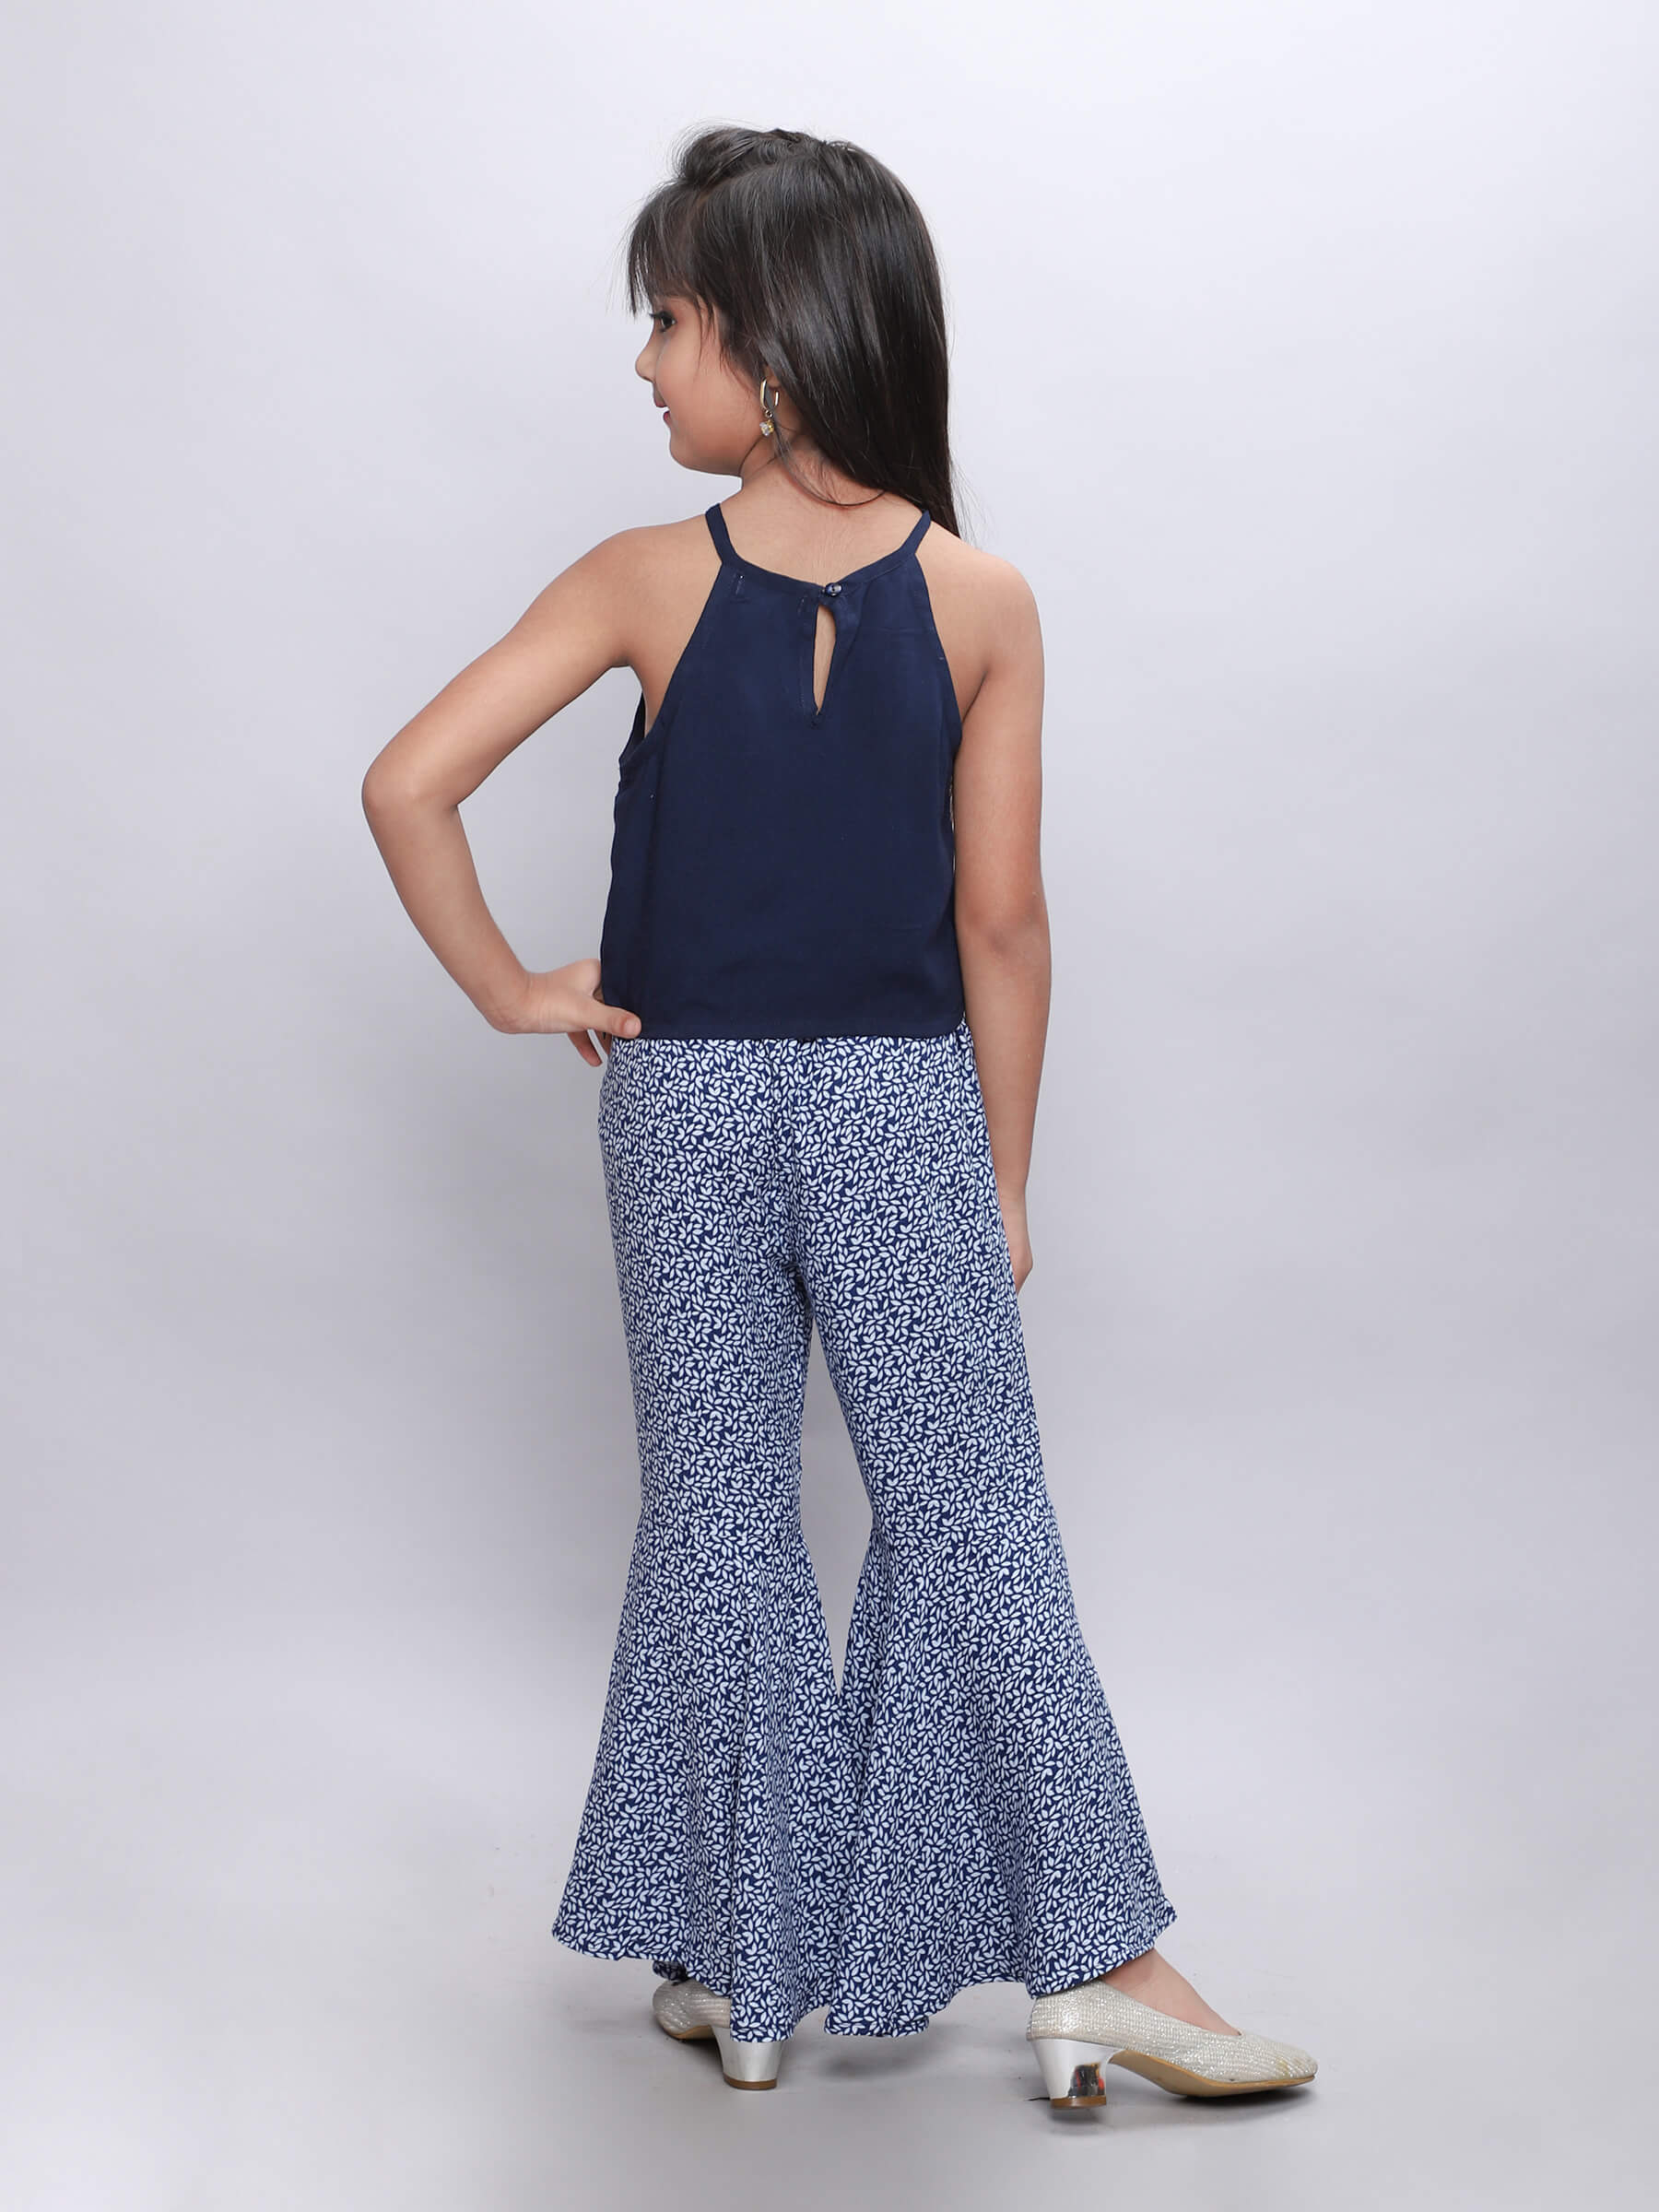 Taffykids solid crop top with printed bell bottom pant set-Navy/White